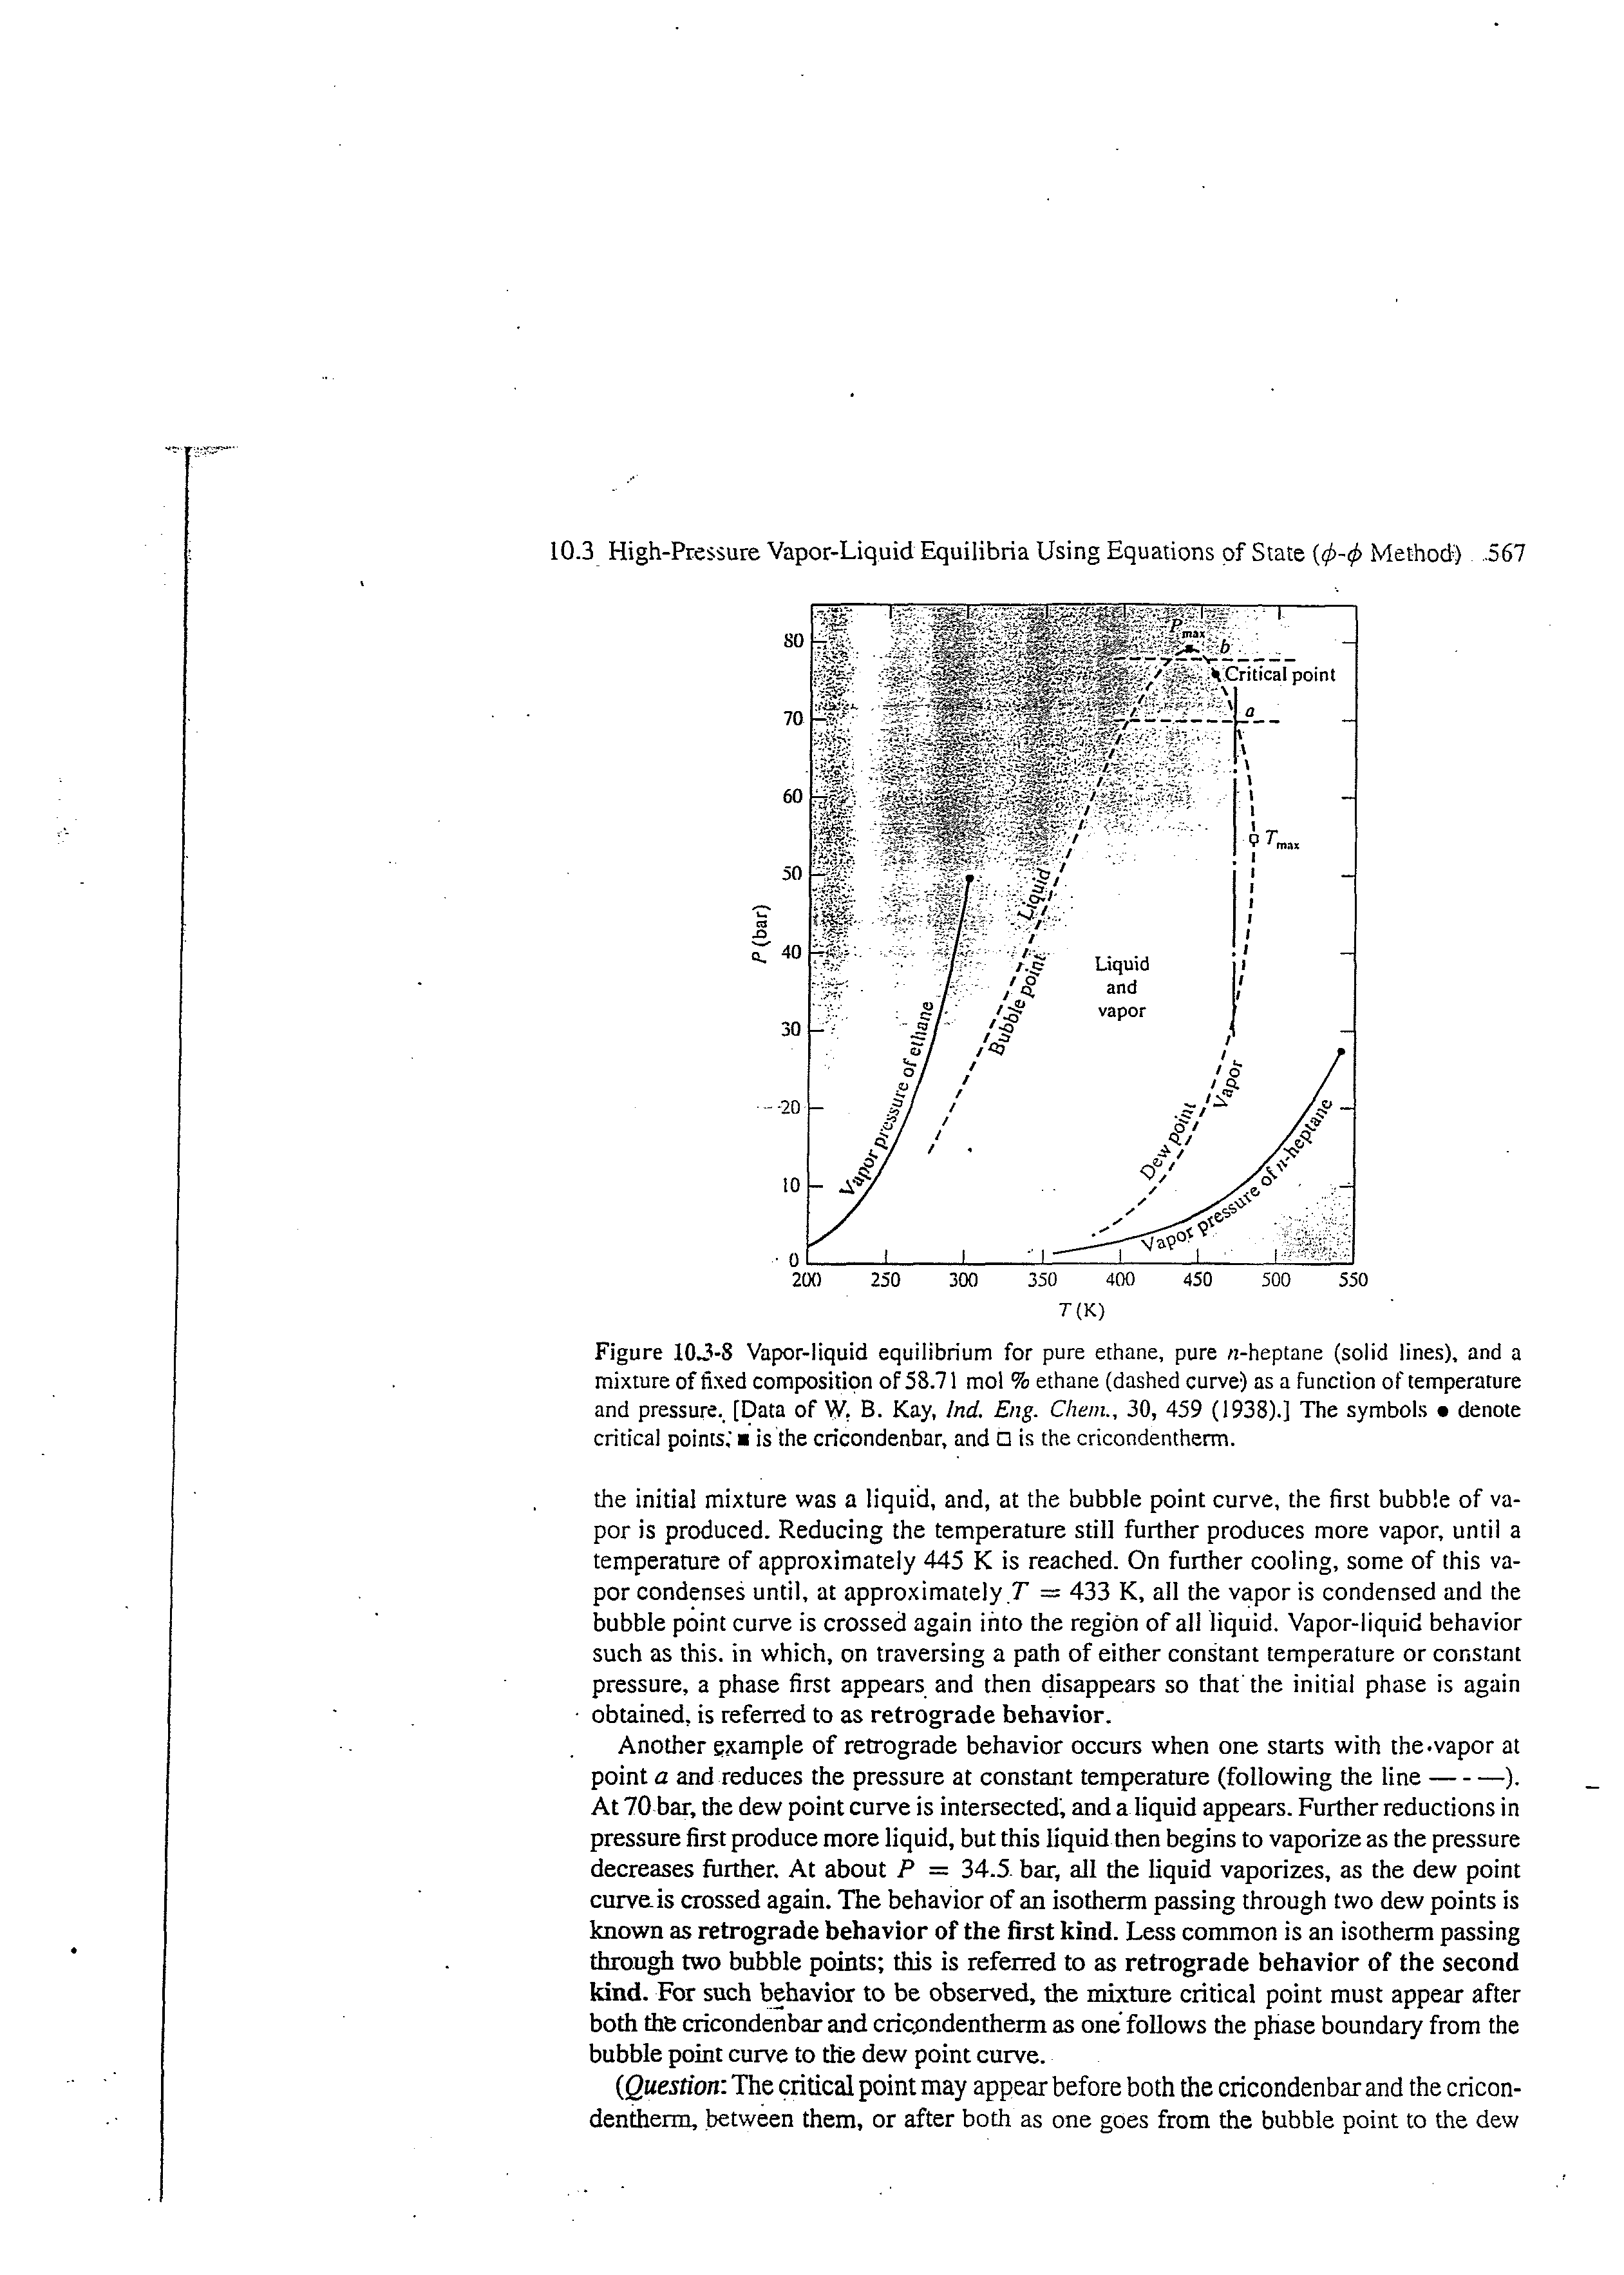 Figure 103-8 Vapor-liquid equilibrium for pure ethane, pure u-heptane (solid lines), and a mixture of fixed composition of 58.71 mol % ethane (dashed curve) as a function of temperature and pressure., [Data of V B. Kay, Ind. Eng. Chem., 30, 459 (1938).] The symbols denote critical points. is the cricondenbar, and O is the cricondentherm.